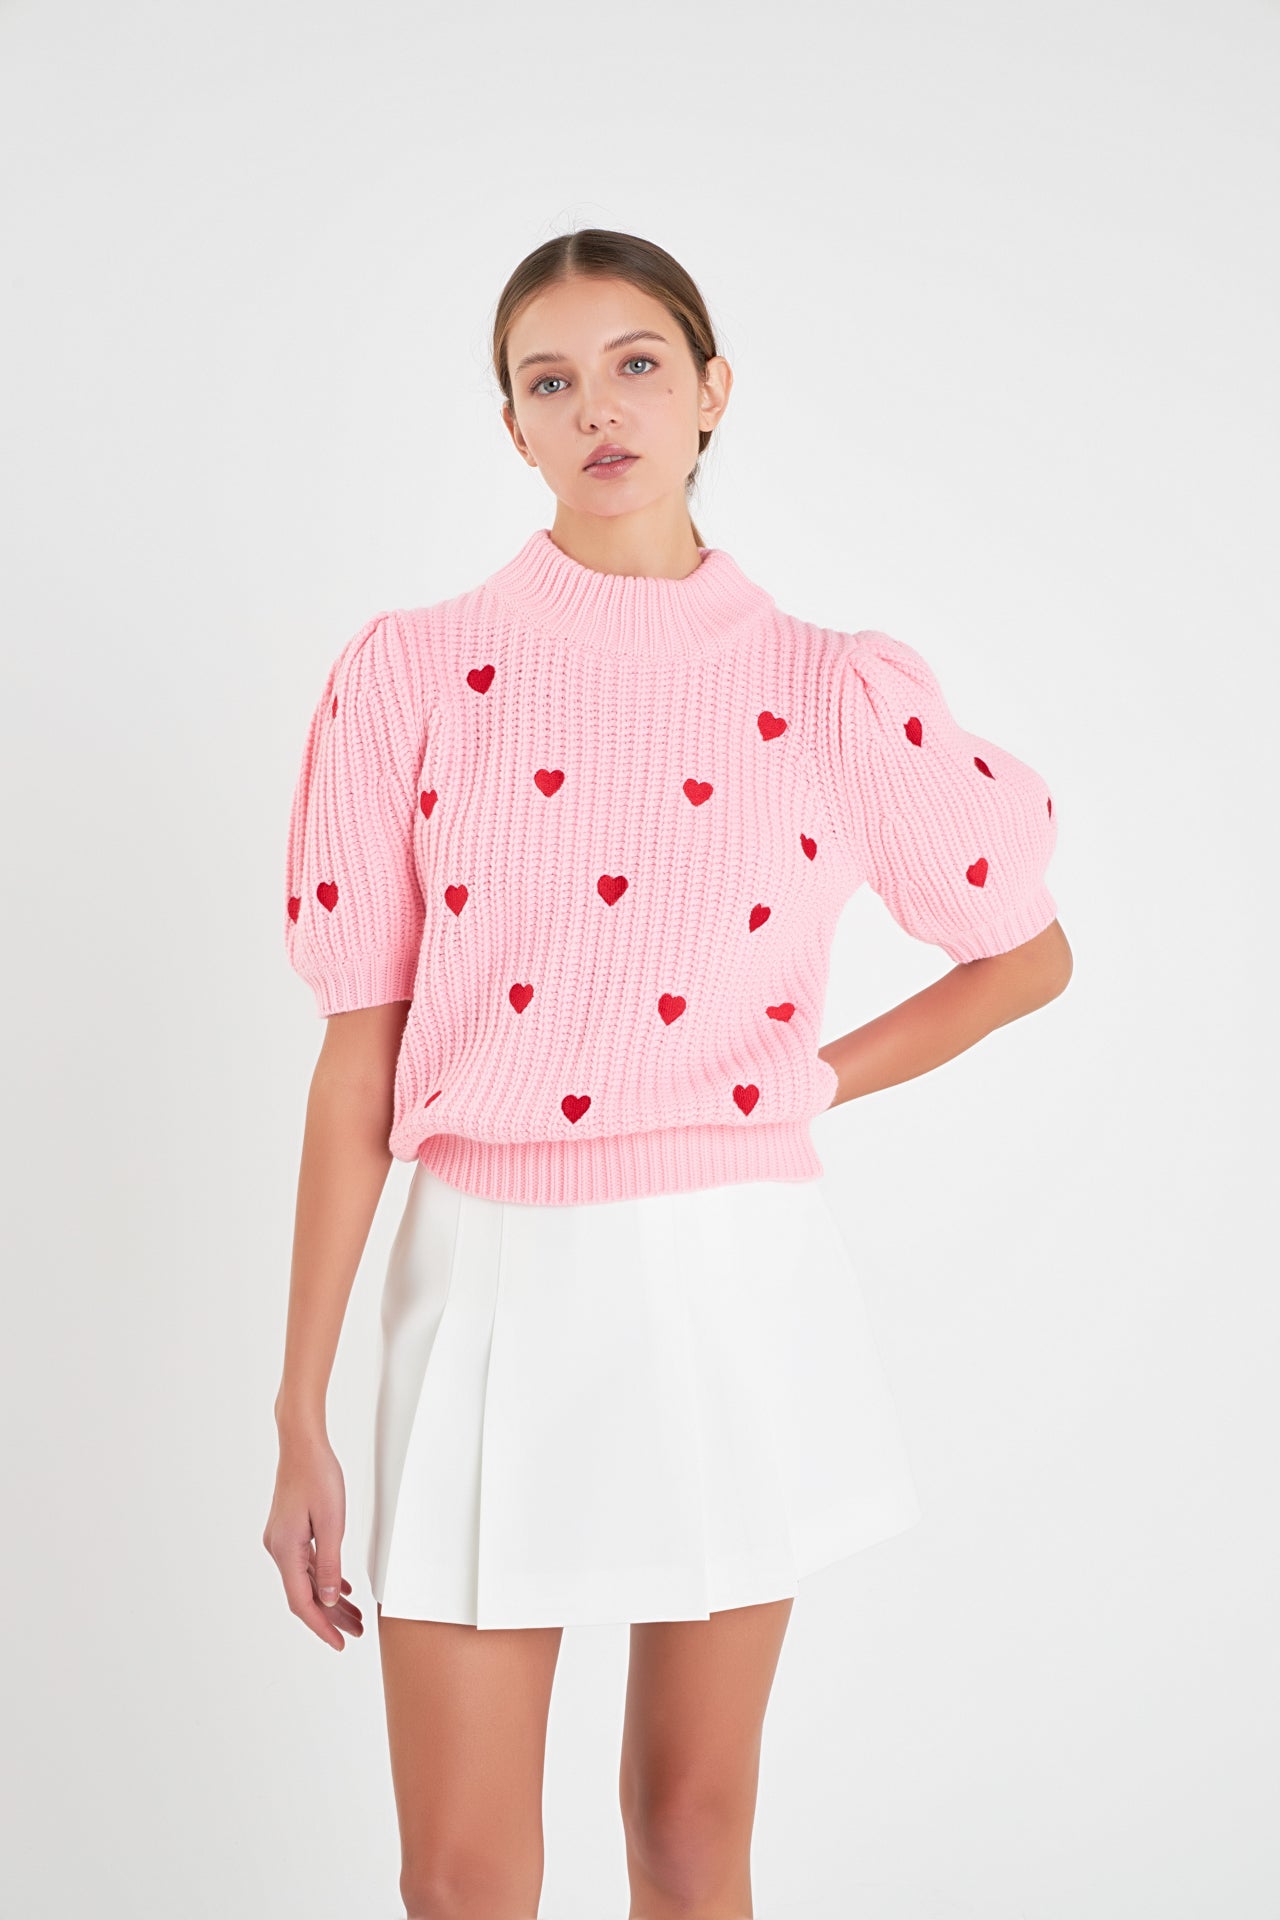 ENGLISH FACTORY - Heart Shape Embroidery Sweater - SWEATERS & KNITS available at Objectrare